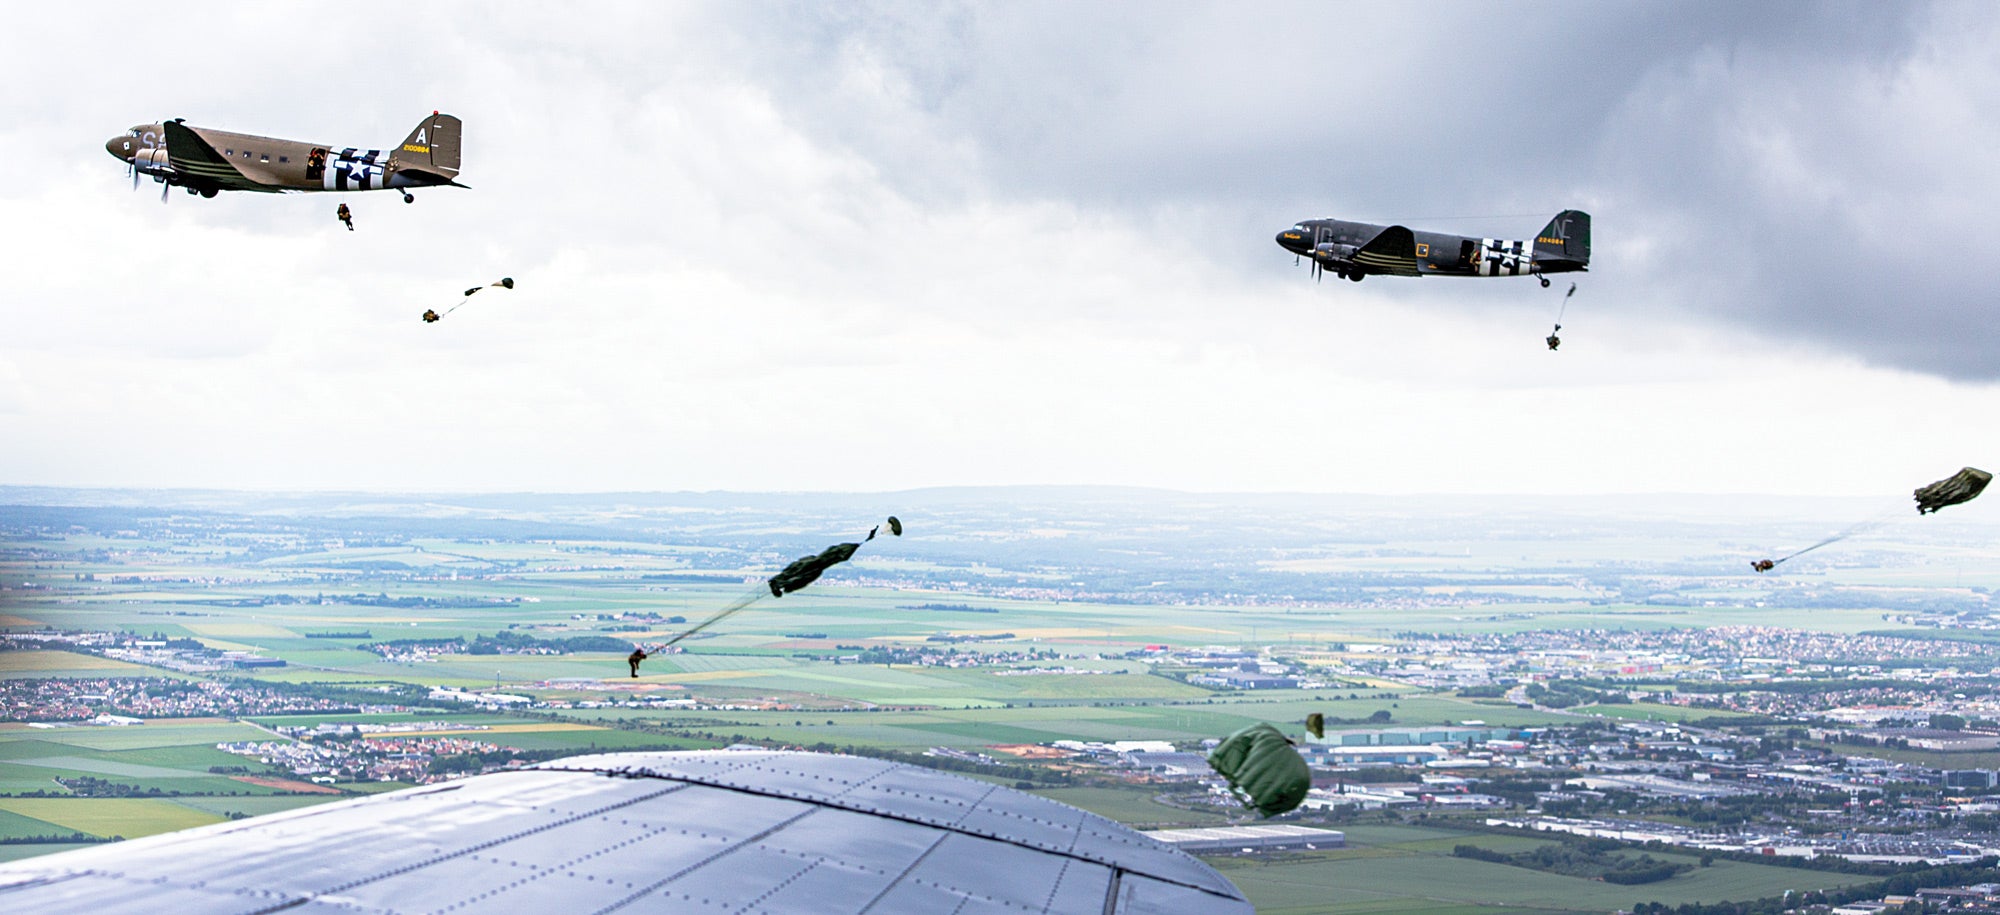 C-47s dropping soldiers